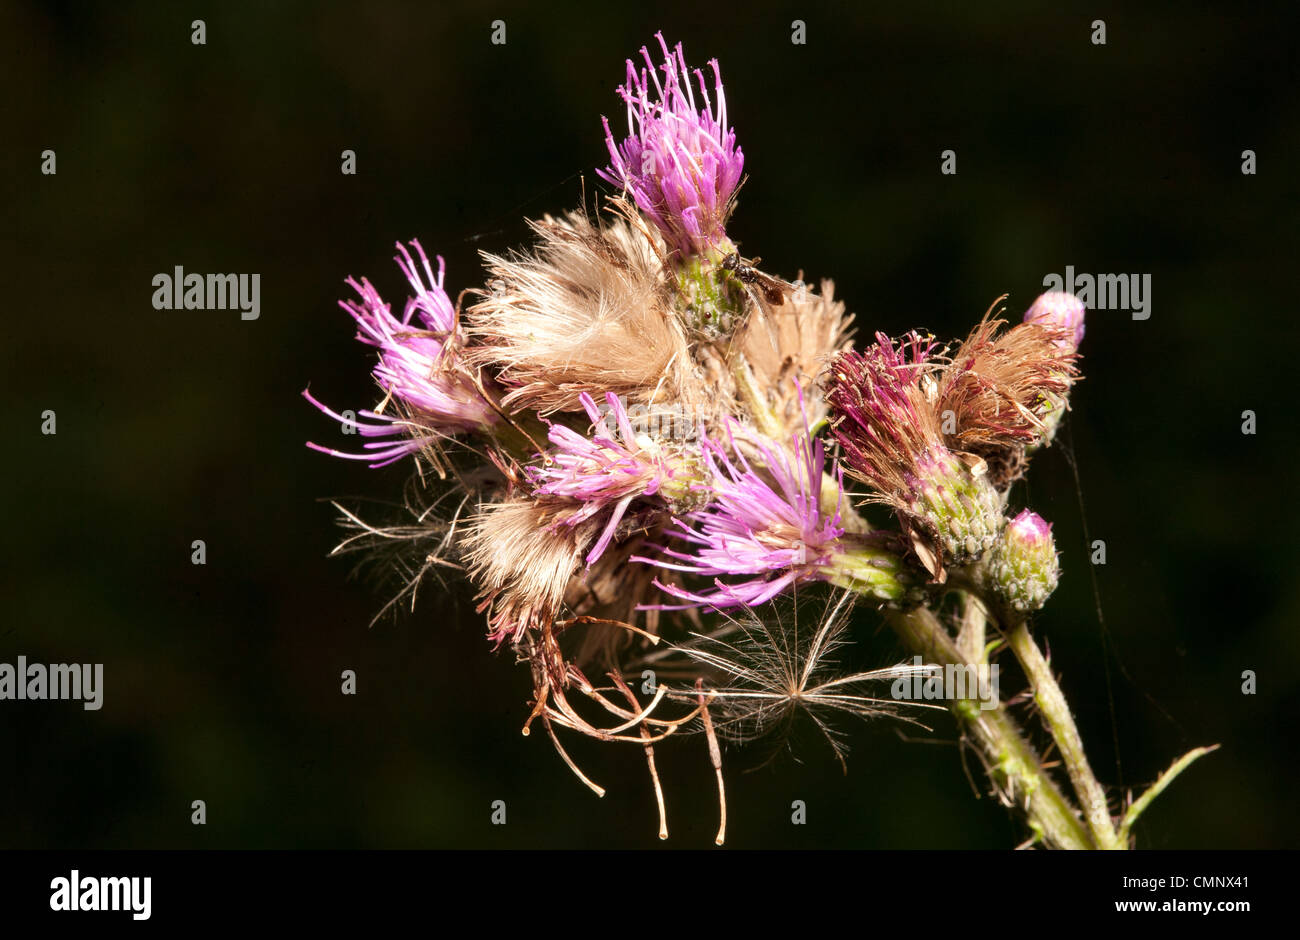 Thistle flower close up against black background Stock Photo